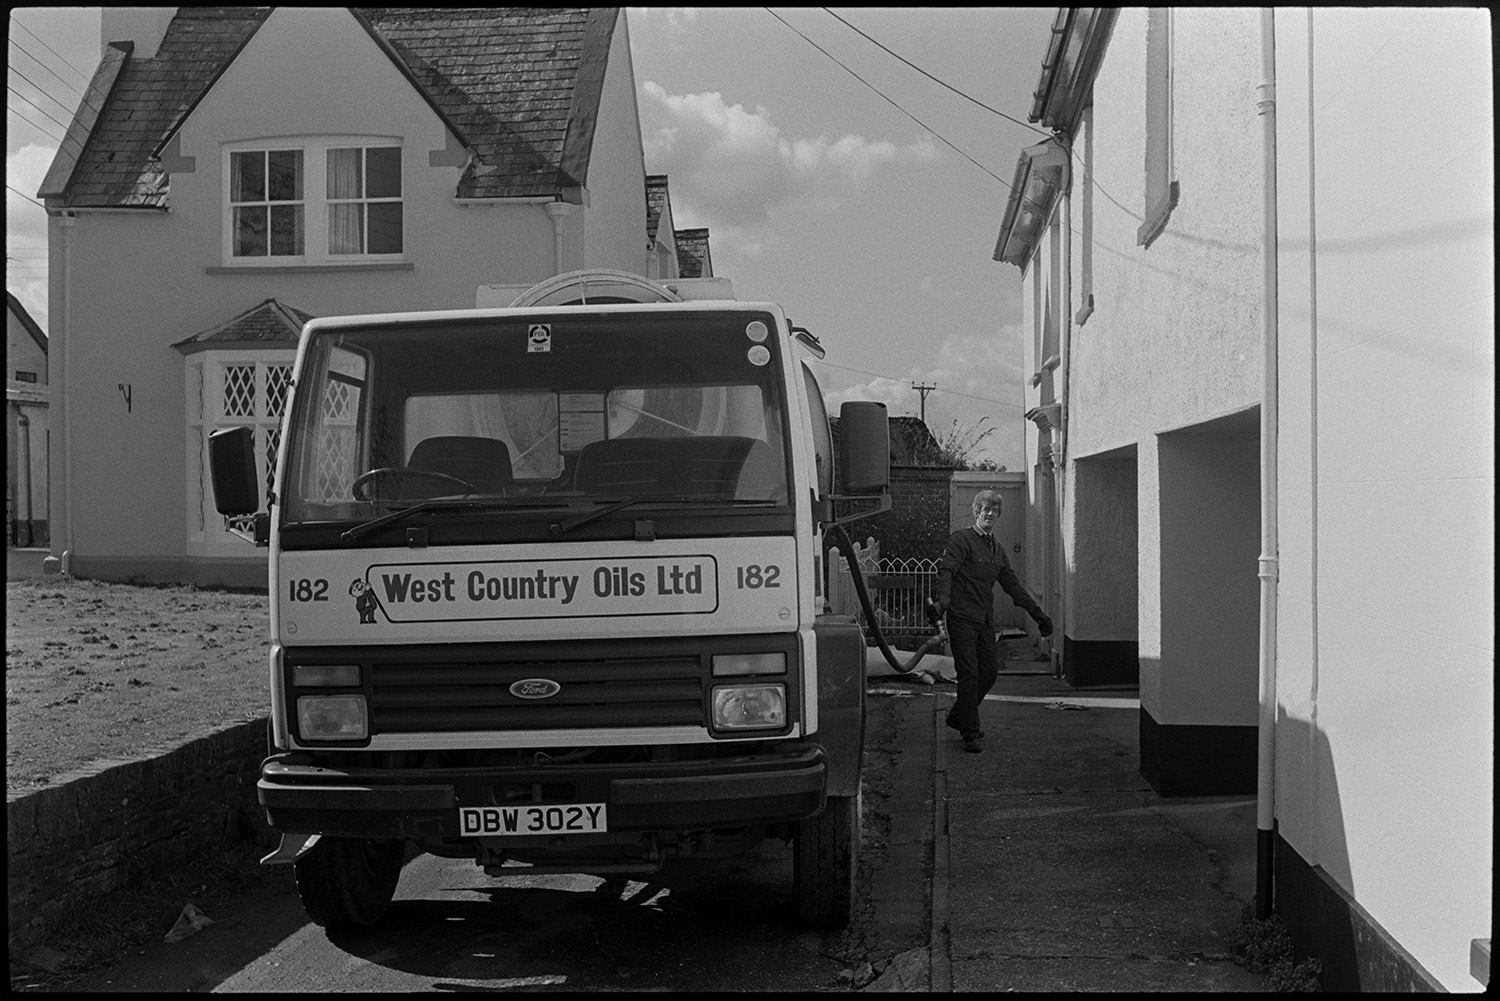 Tanker delivering oil to house.
[A man taking a hose from a parked tanker to deliver oil to a house in New Street, Chulmleigh. The tanker belongs to West Country Oils Ltd. There are other houses in the background.]